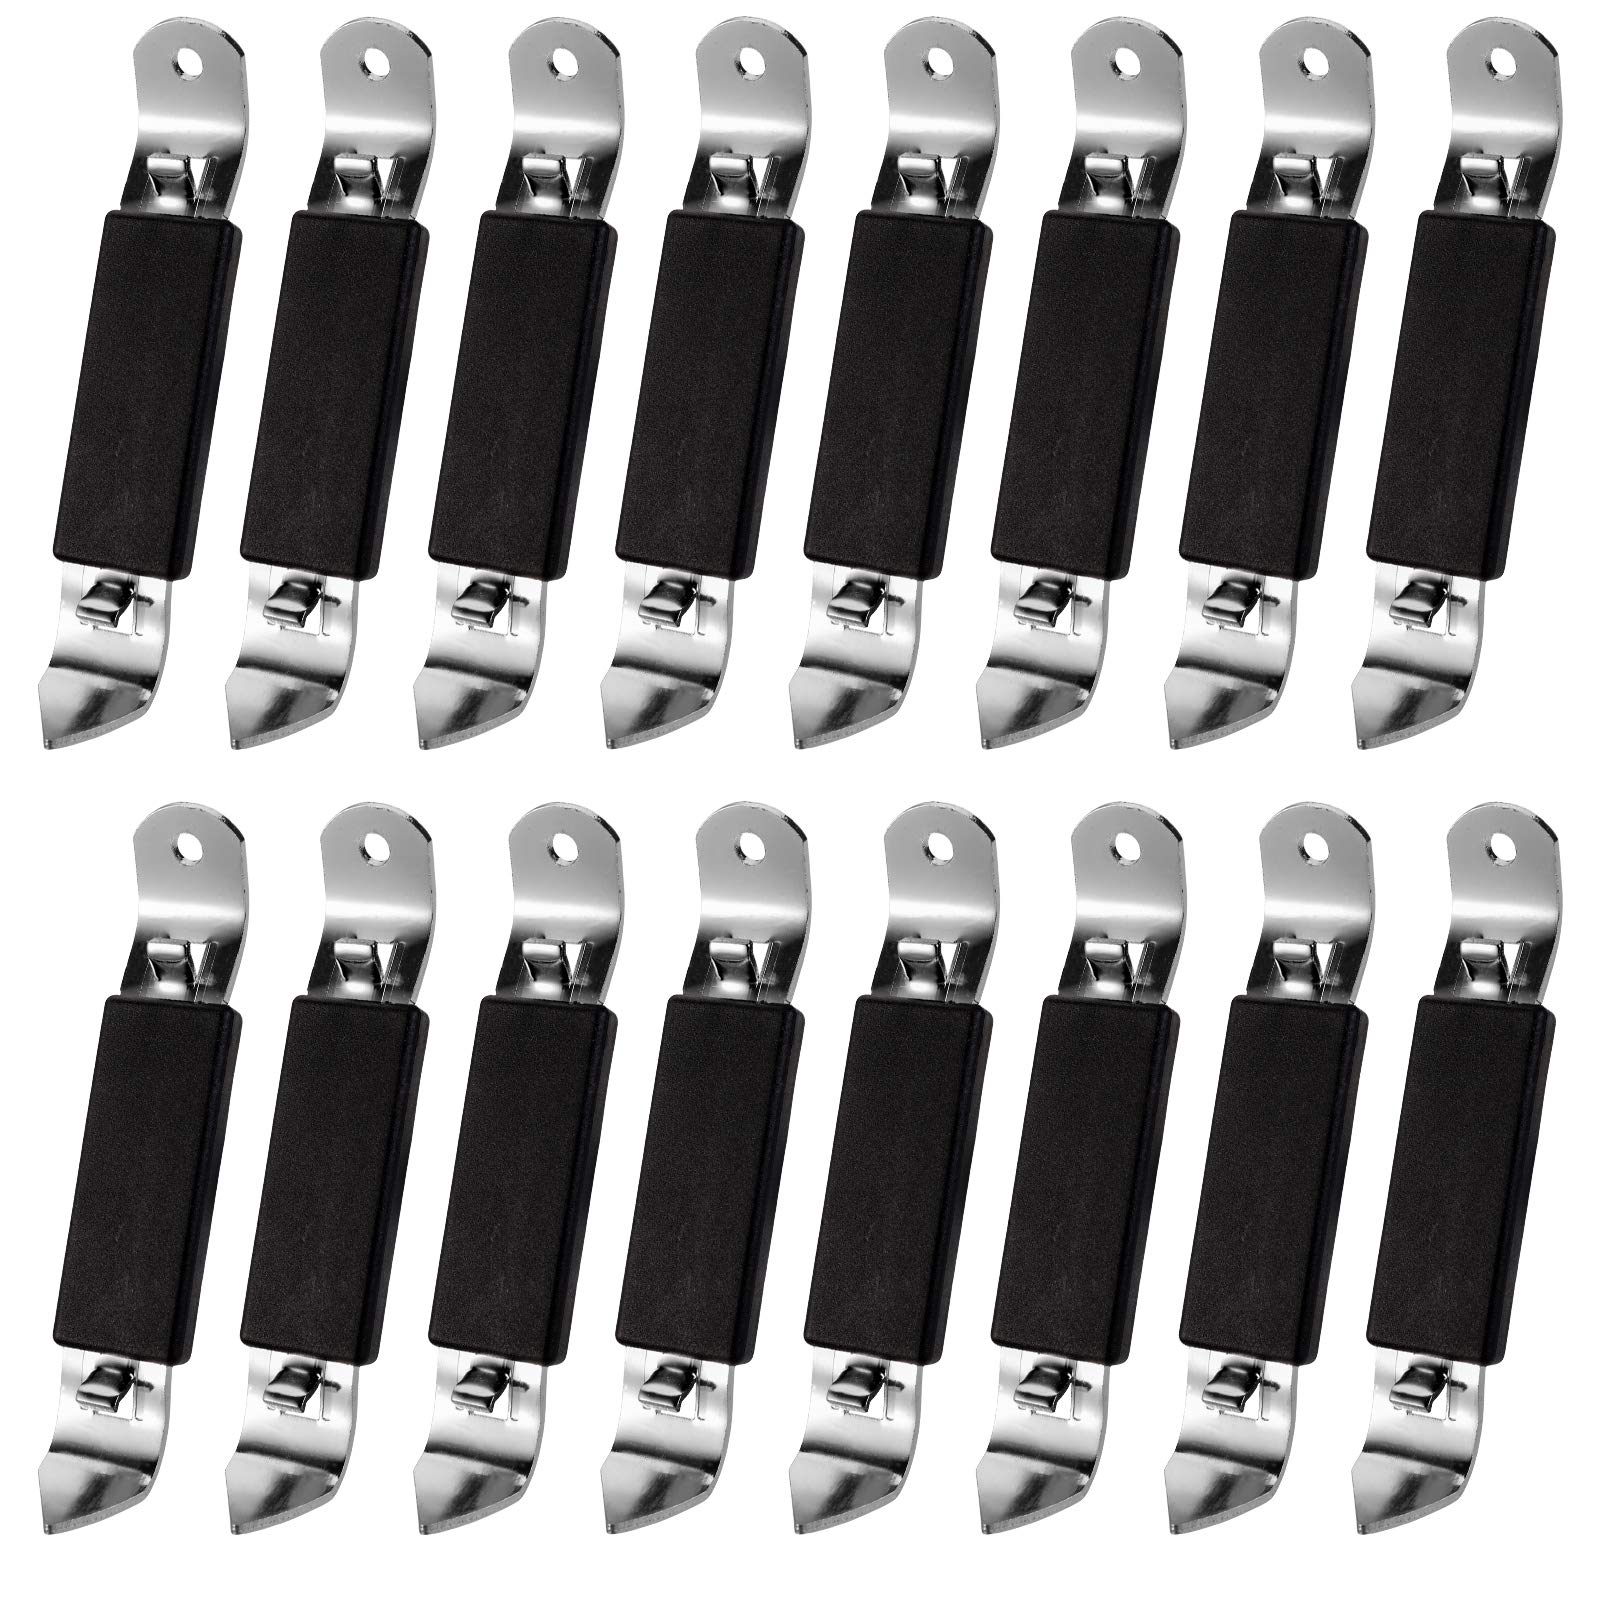 Hedume 16 Pack Magnetic Bottle Openers, Heavy Duty Stainless Steel Bottle Openers, Can Tapper Bottle Opener with Magnet for Home, Camping, Traveling